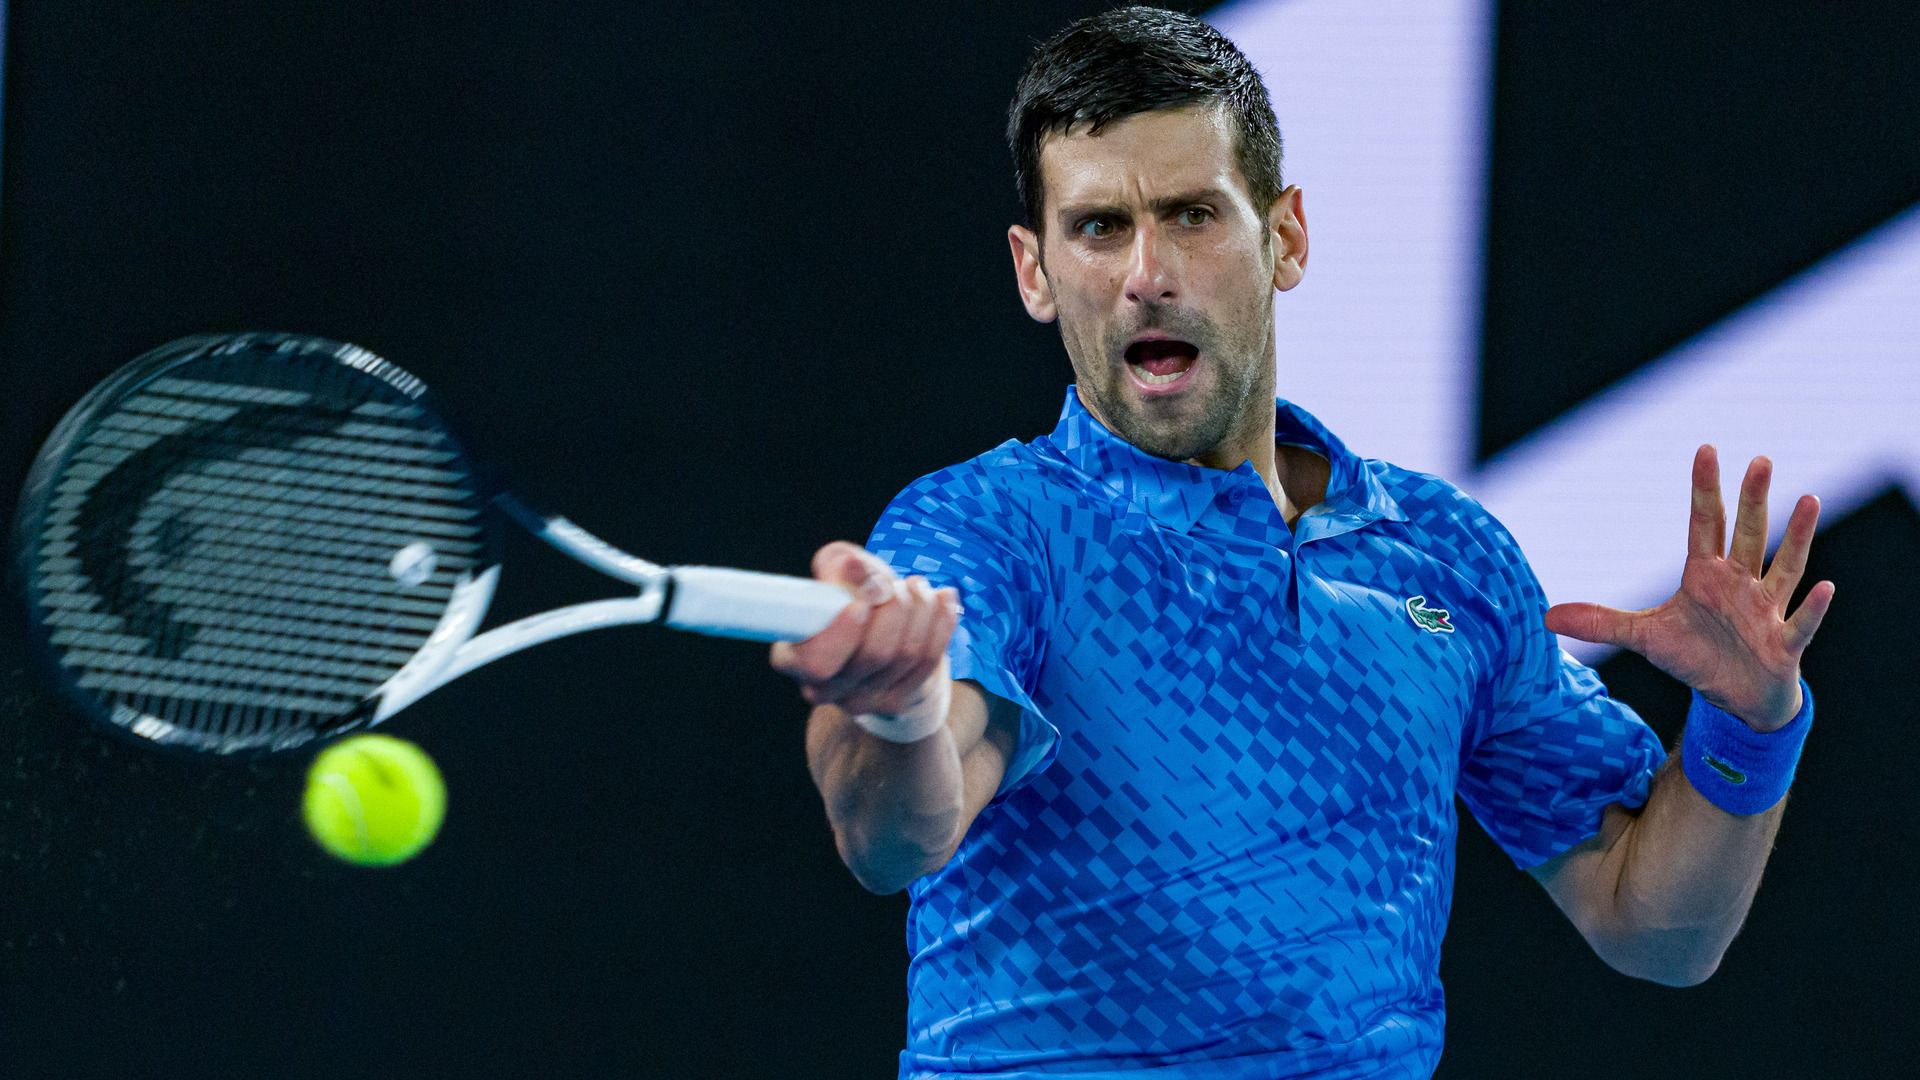 Australian Open: Djokovic returns with a bang in quest for his 22nd Grand Slam title